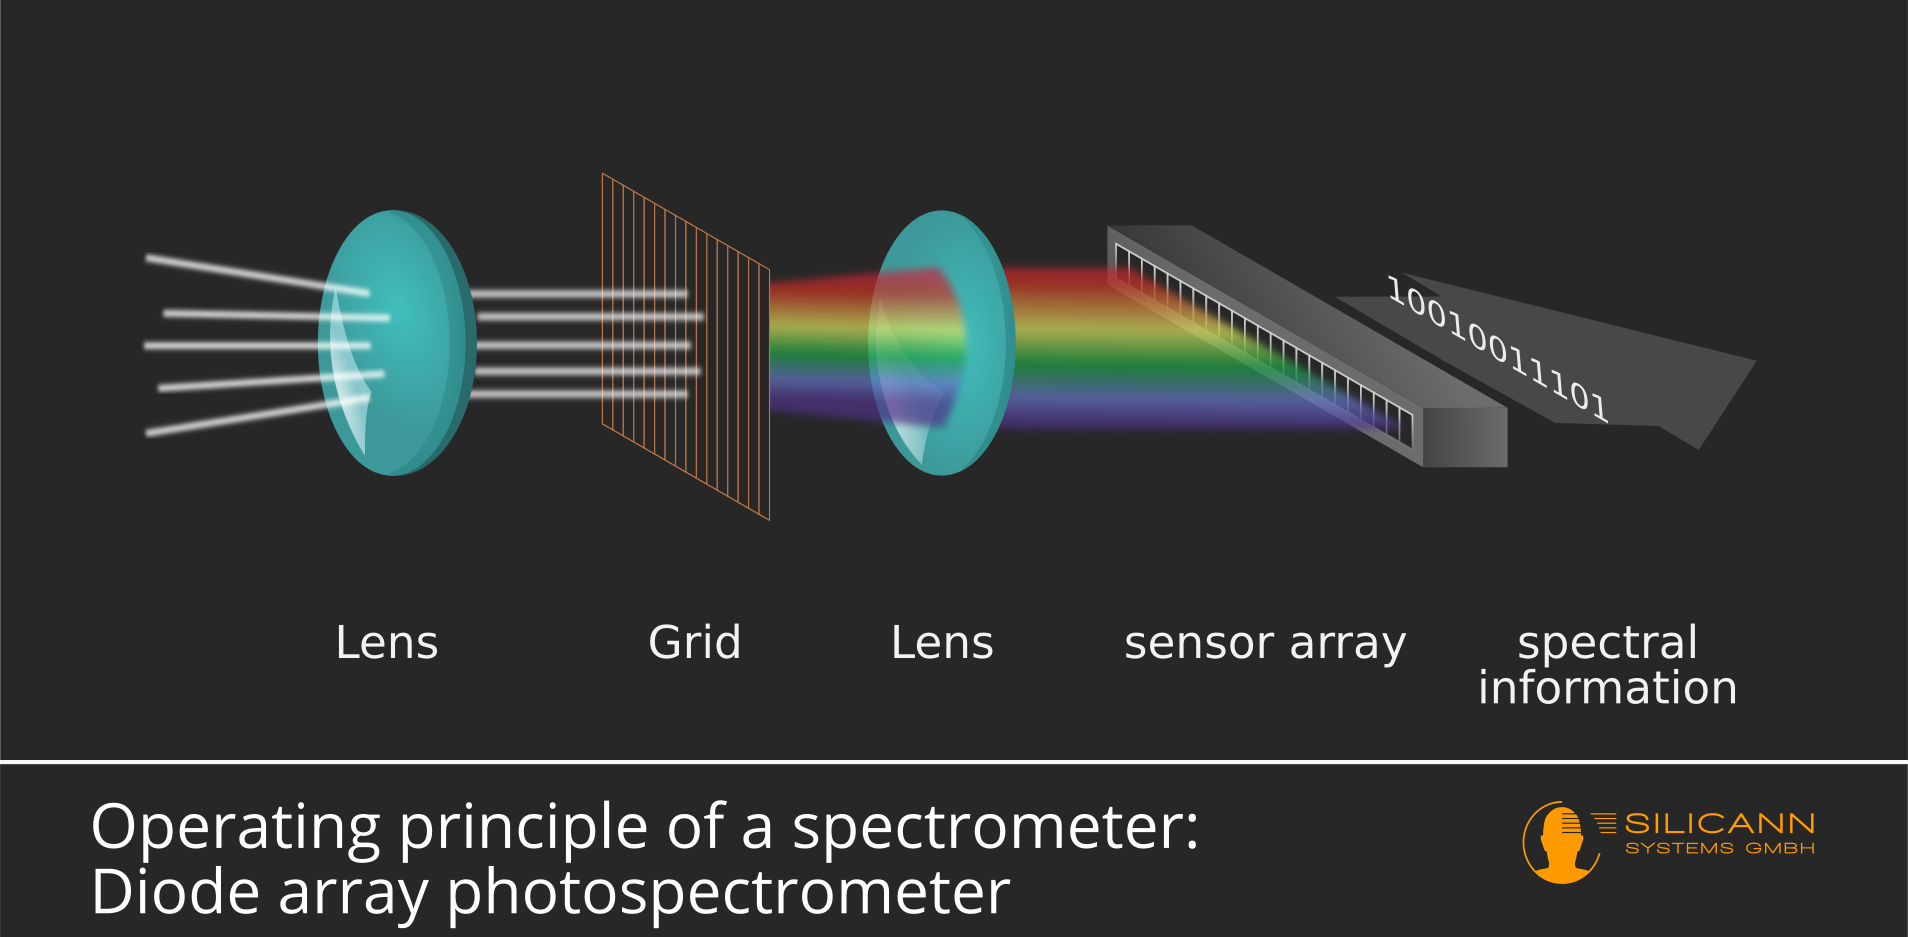 The difference between spectroscope, spectrometer and spectrophotometer